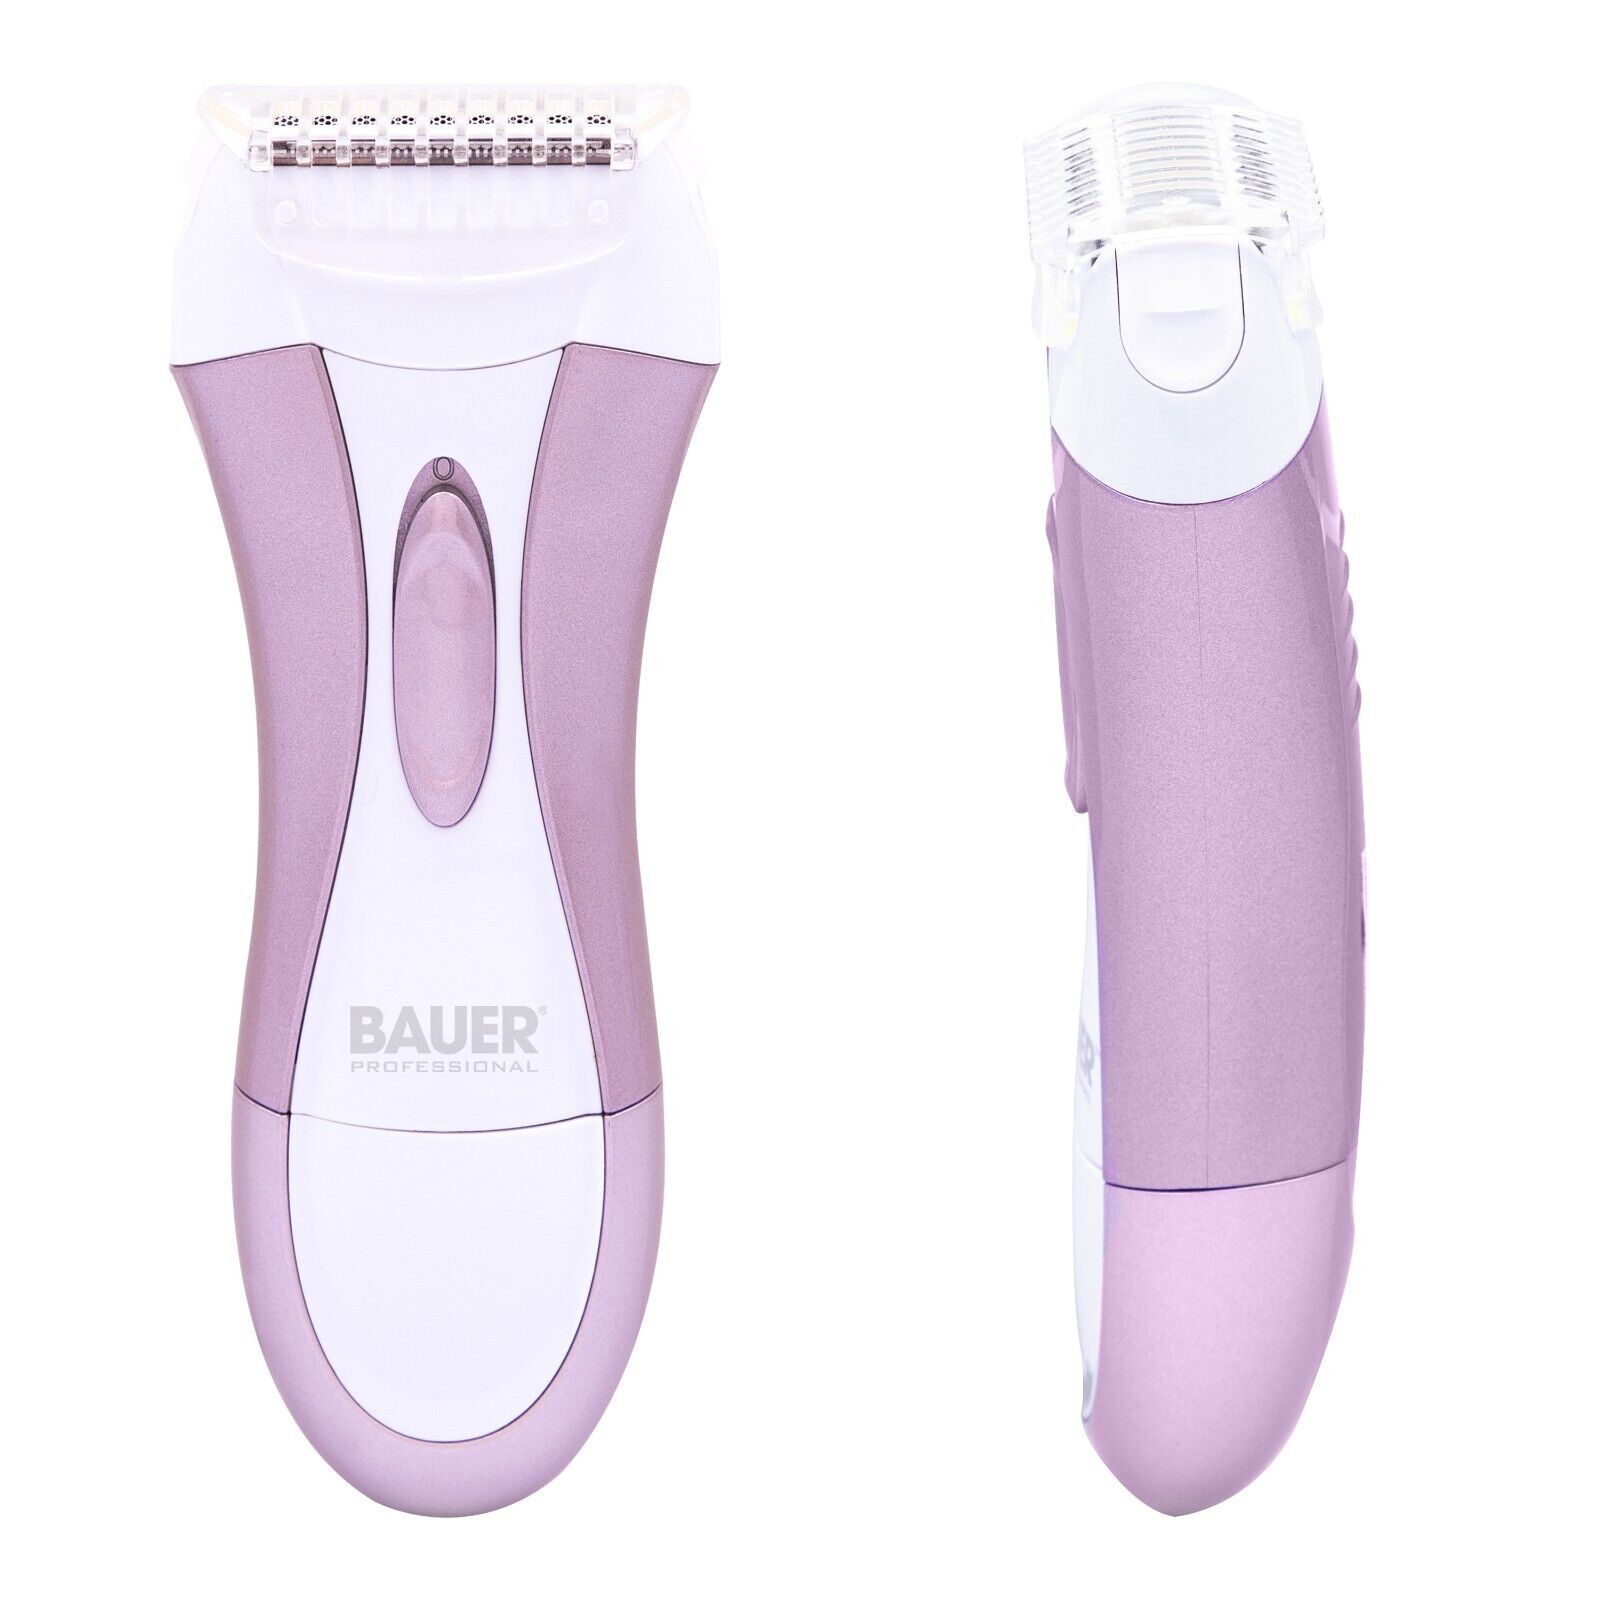 Bauer Lady Shaver - Soft & Smooth